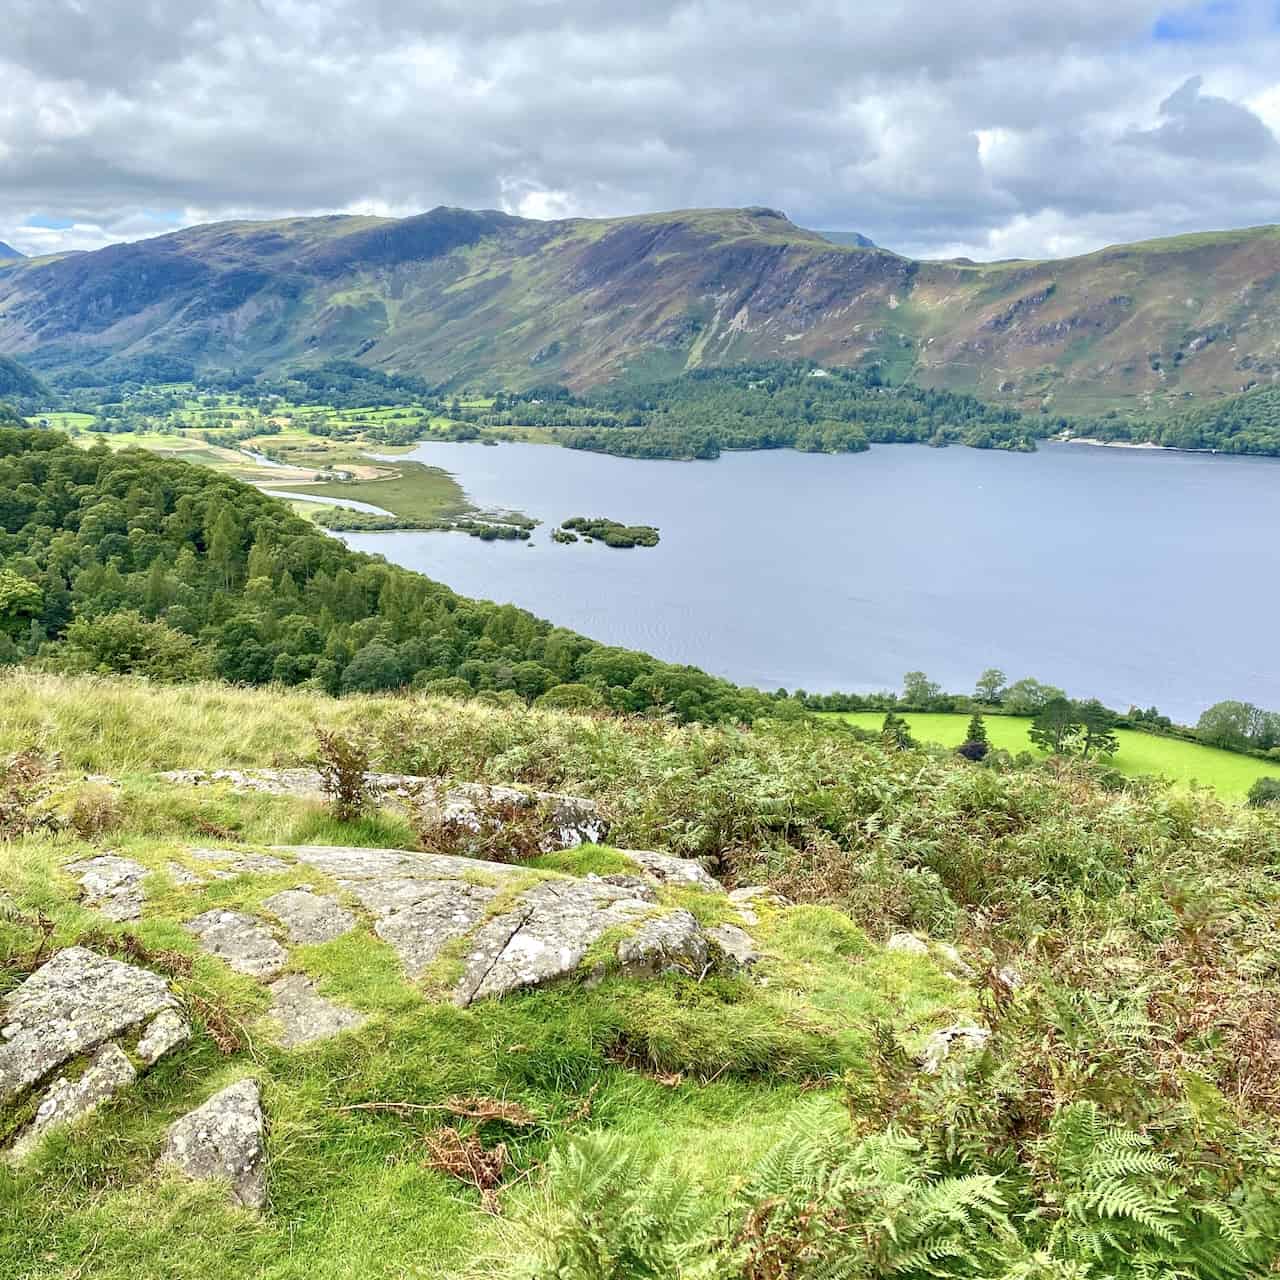 The view south-west from Brown Knotts across the southern half of Derwent Water. The woodland of Manesty Park sits below the steep slopes of Cat Bells and Maiden Moor.